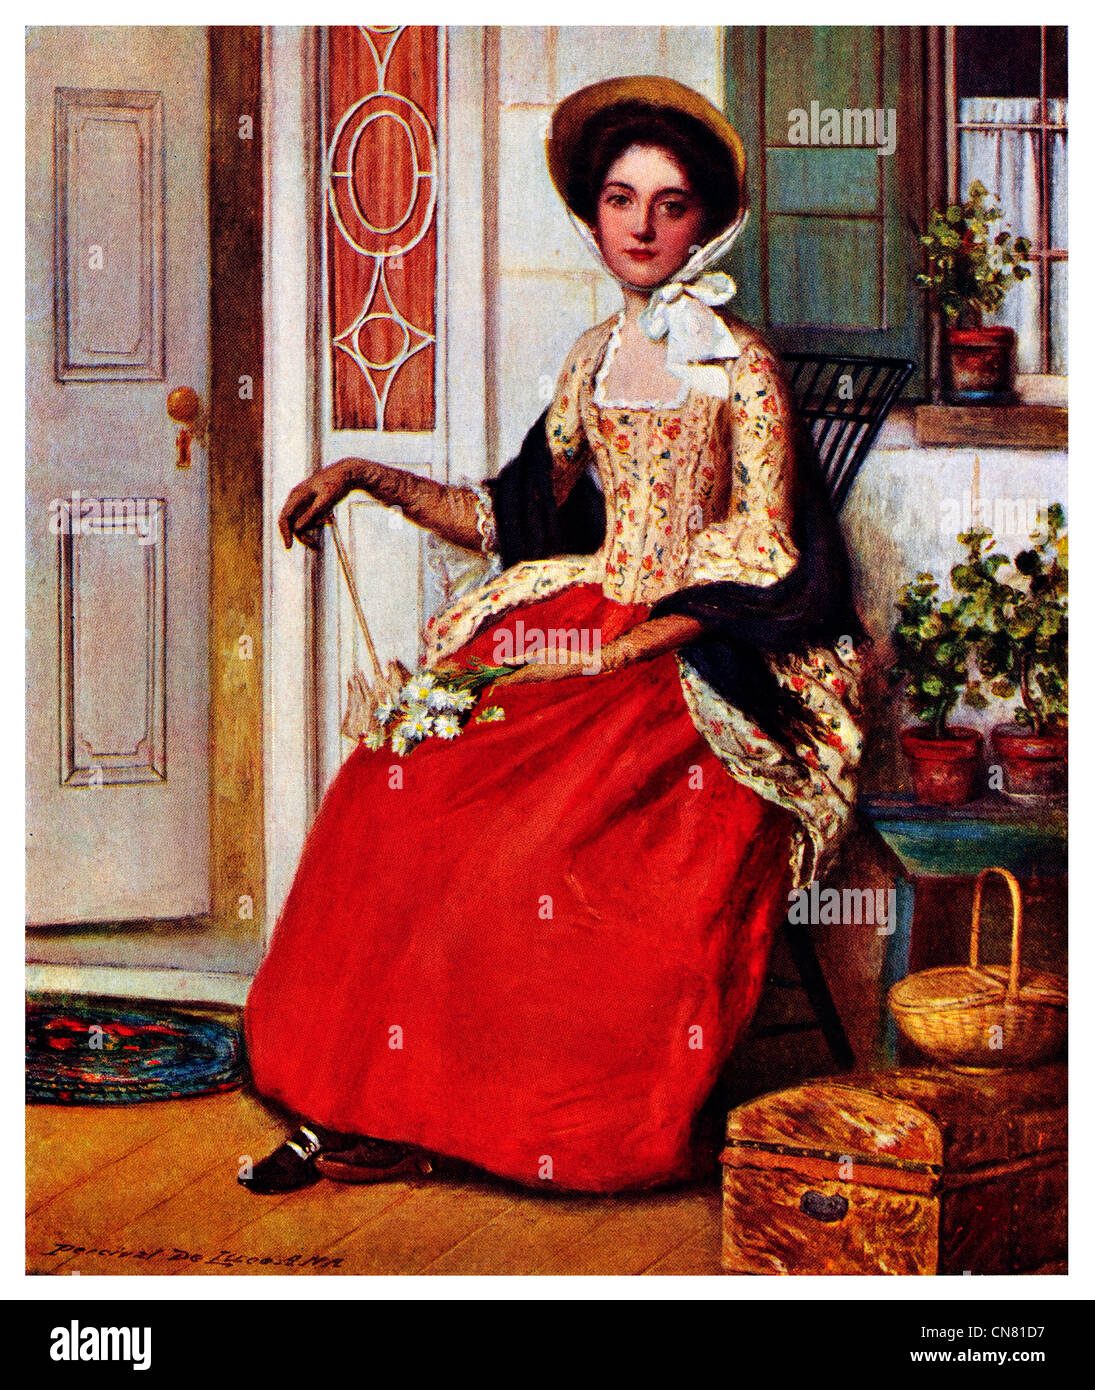 Lady waiting for the coach 1900 painting by Percival De Luce Stock Photo